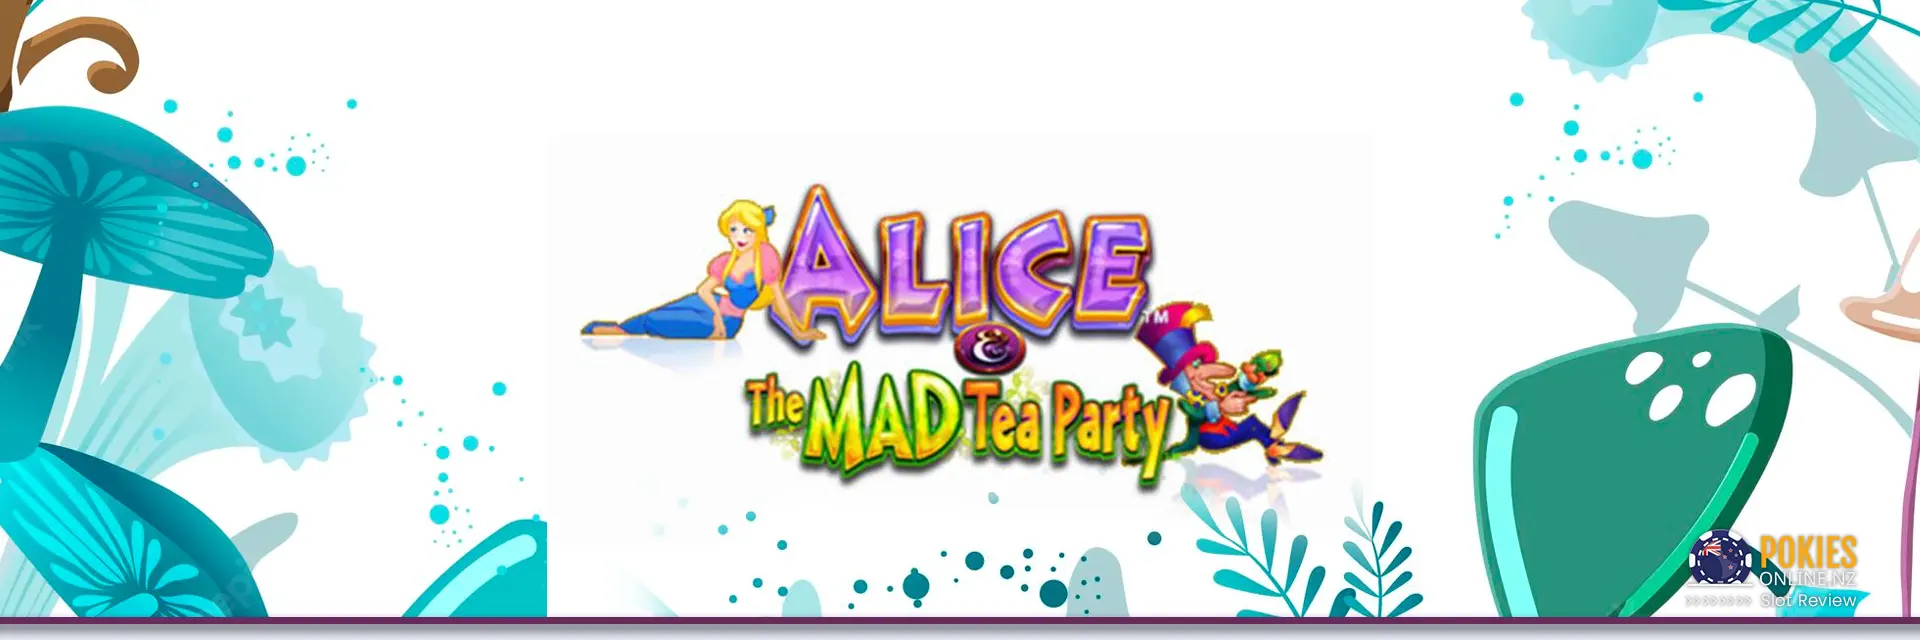 Alice and the mad tea party slot banner